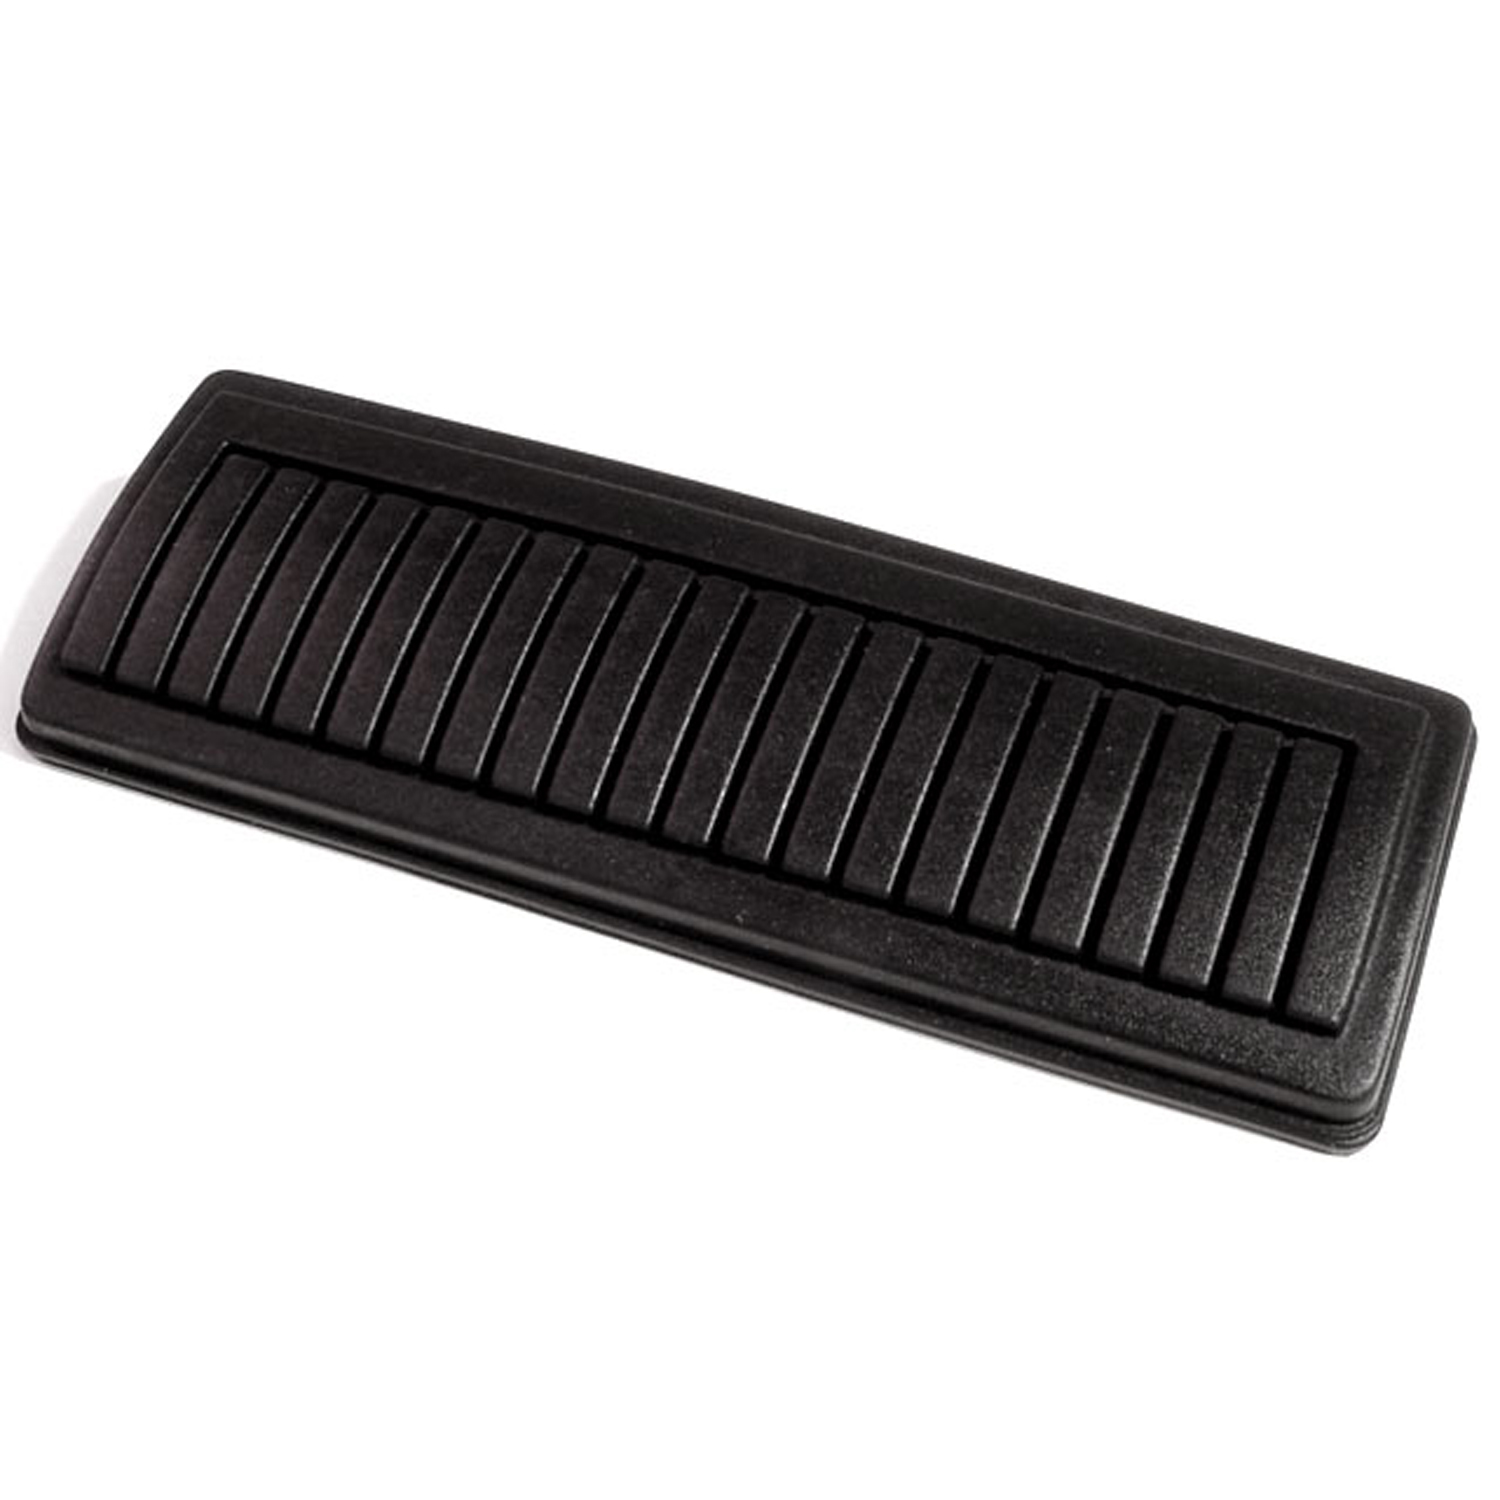 1966 Dodge Dart Brake Pedal Pad, for models with automatic transmission-CB 200